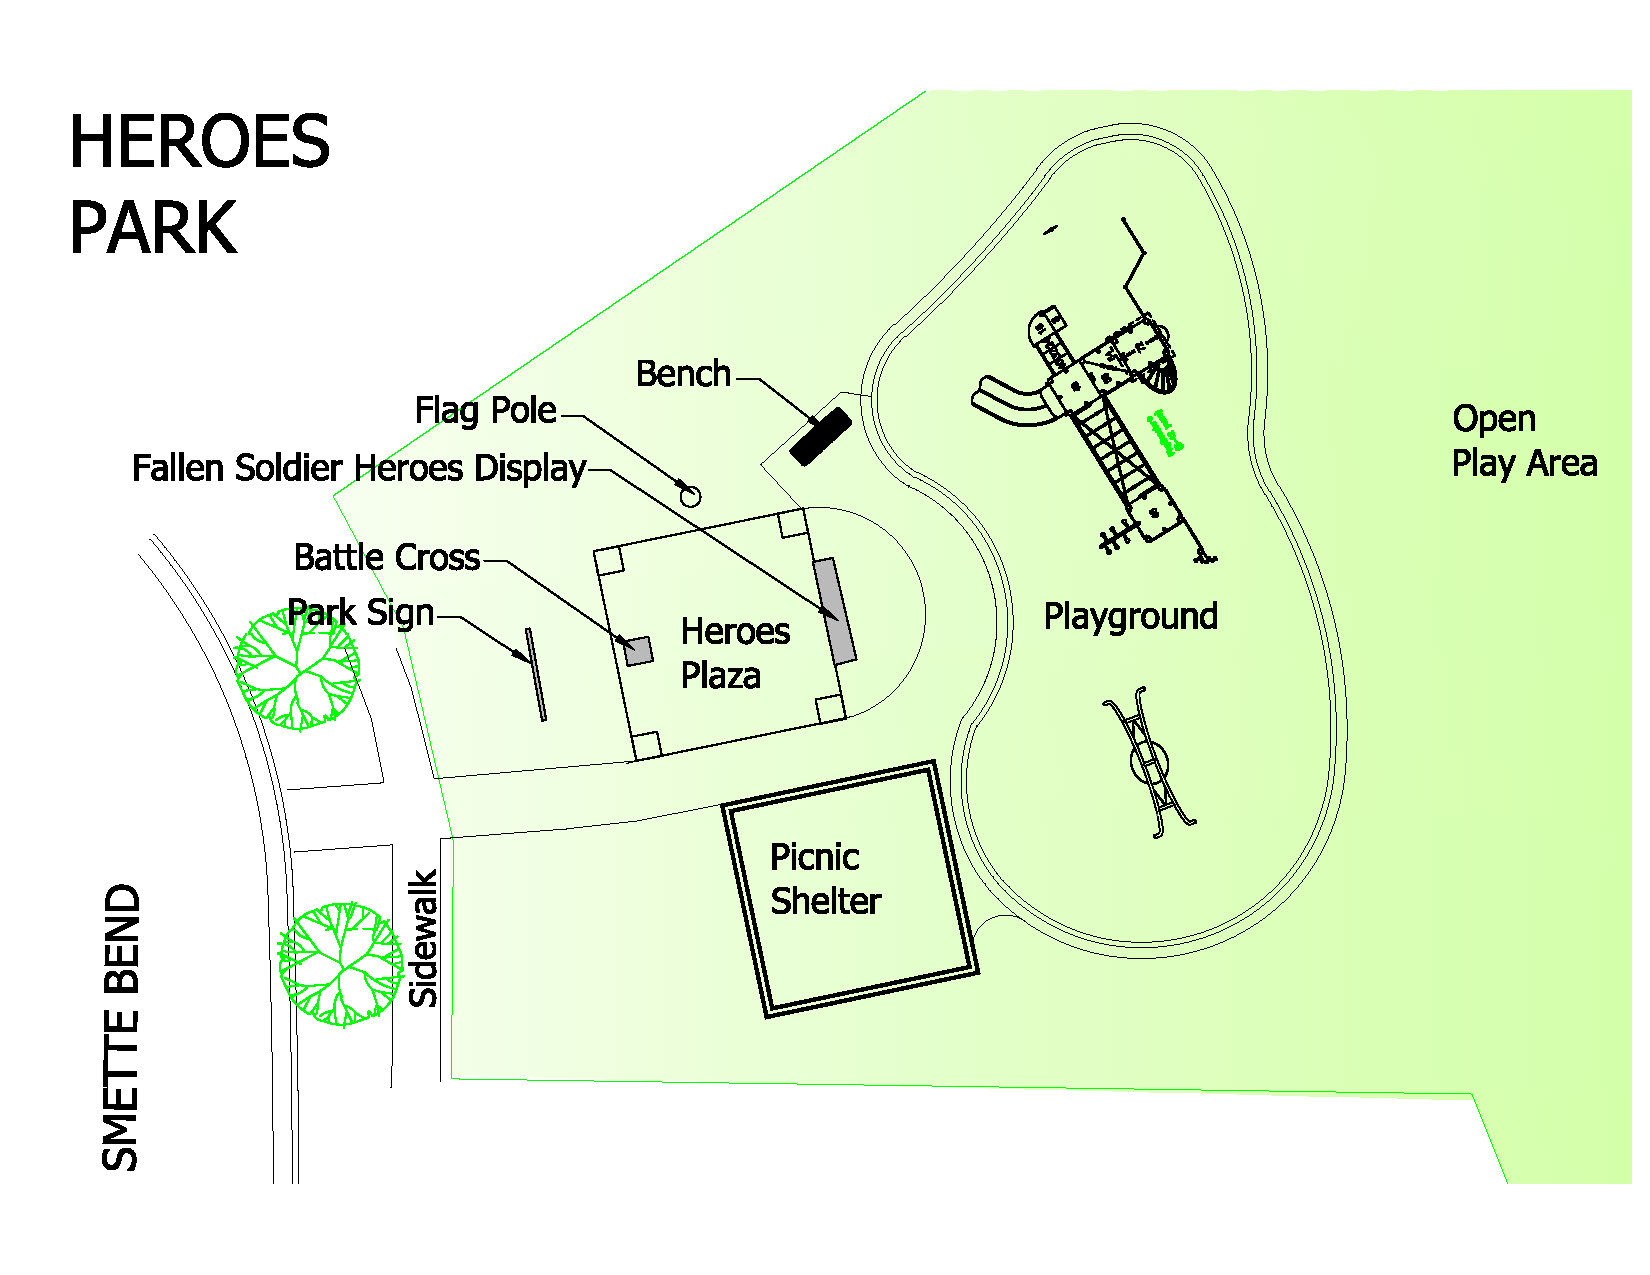 Map of Heroes Park showing amenities including Heroes Plaza (Battle Cross, Flag Pole, Fall Soldier Heroes Display), playground, picnic shelter and open play area.